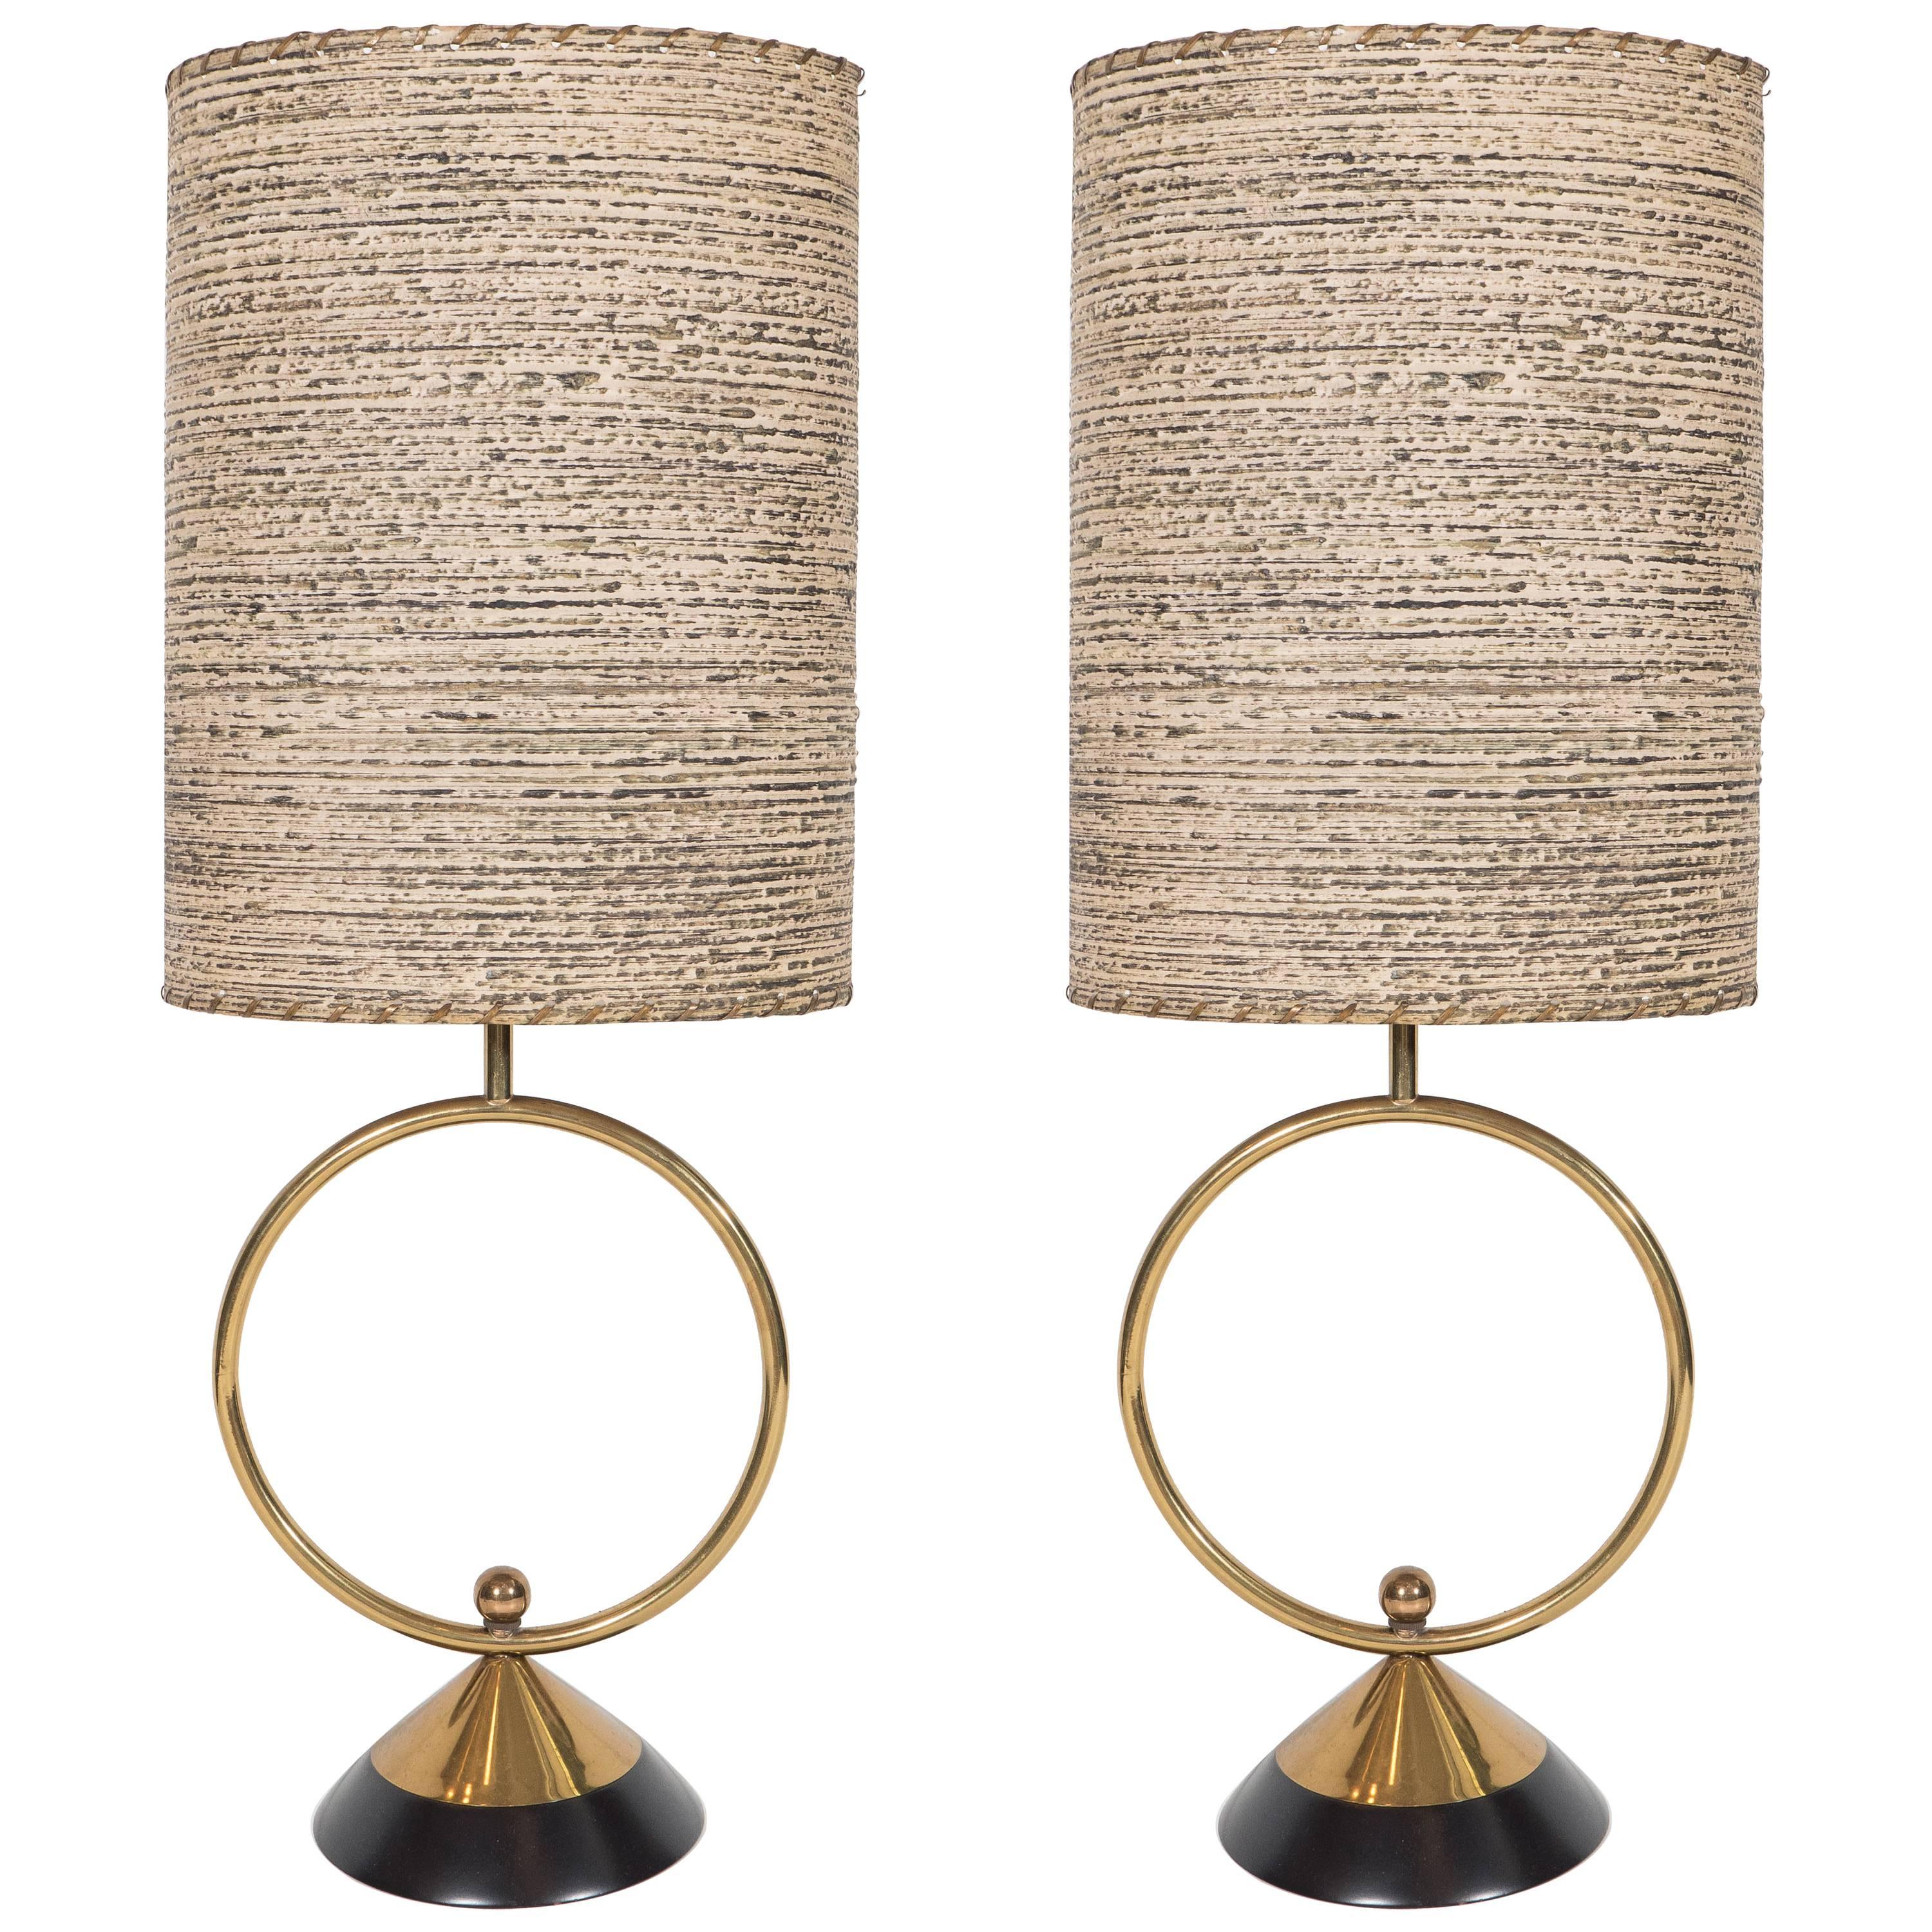 Pair of Early 20th Century Art Deco Table Lamps